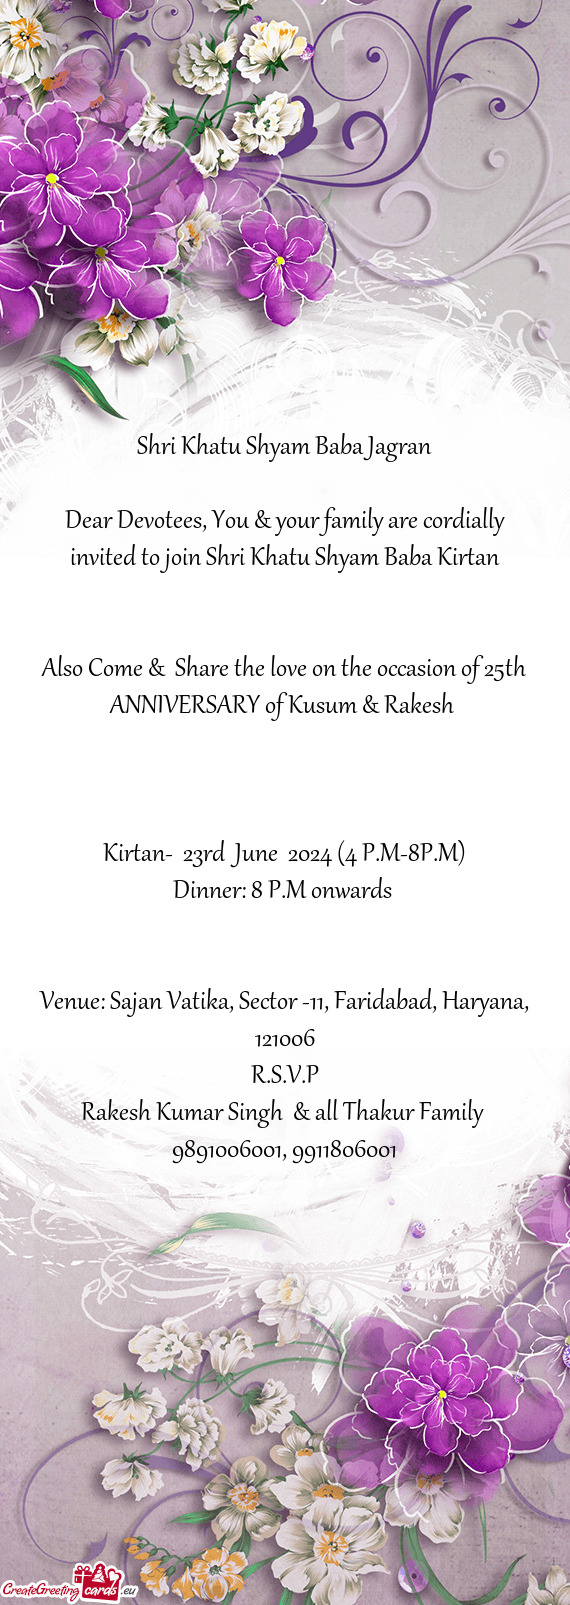 Also Come & Share the love on the occasion of 25th ANNIVERSARY of Kusum & Rakesh